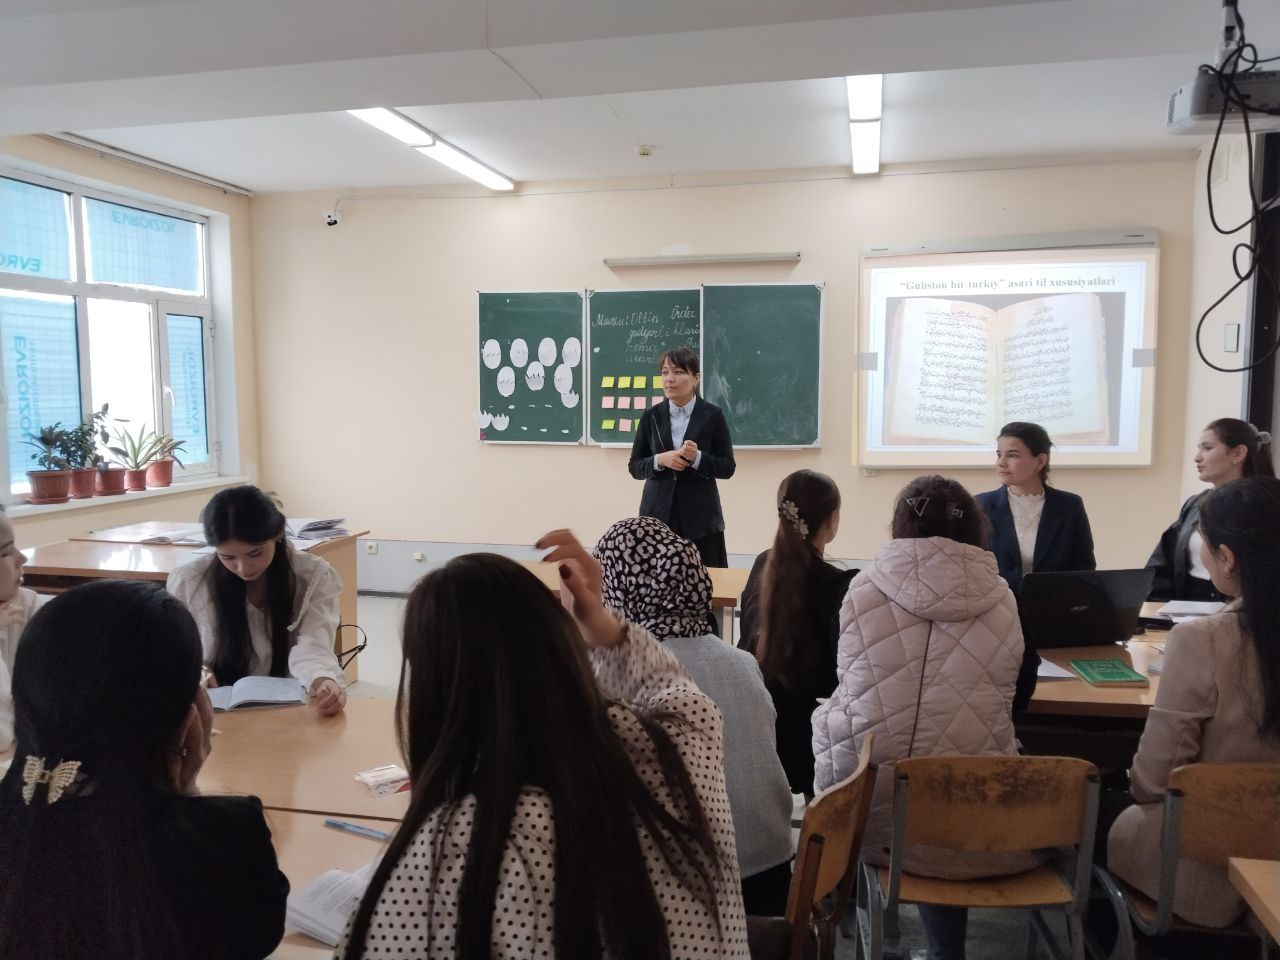 An open lesson on the history of the Uzbek language was held.